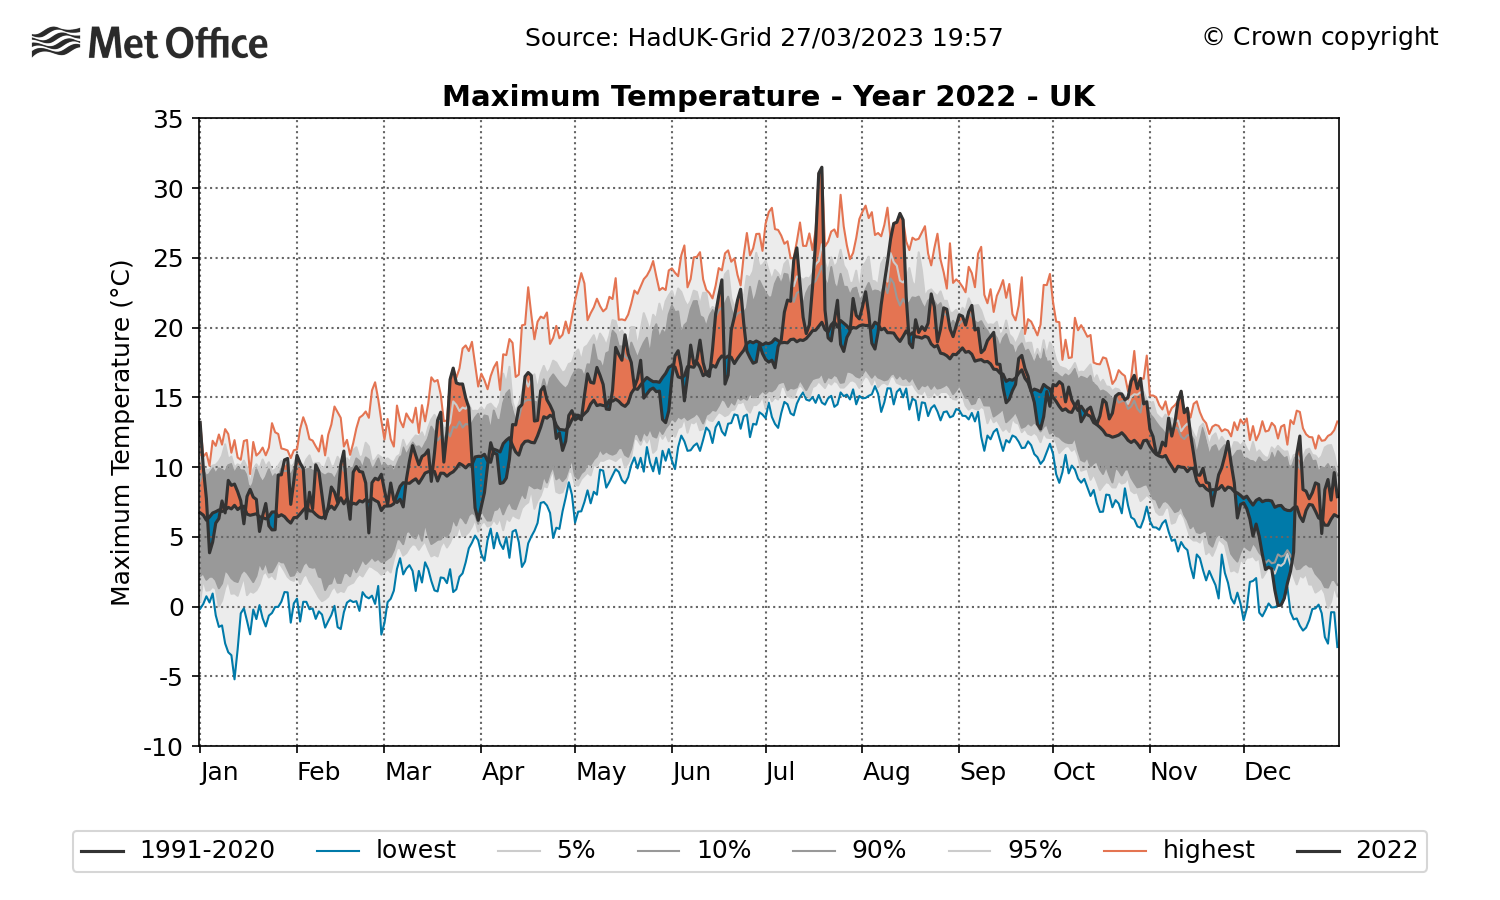 The graph shows daily UK maximum temperatures throughout 2022 compared to average. The graph shows above average temperatures very regularly, albeit with a marked cool spell in early December.